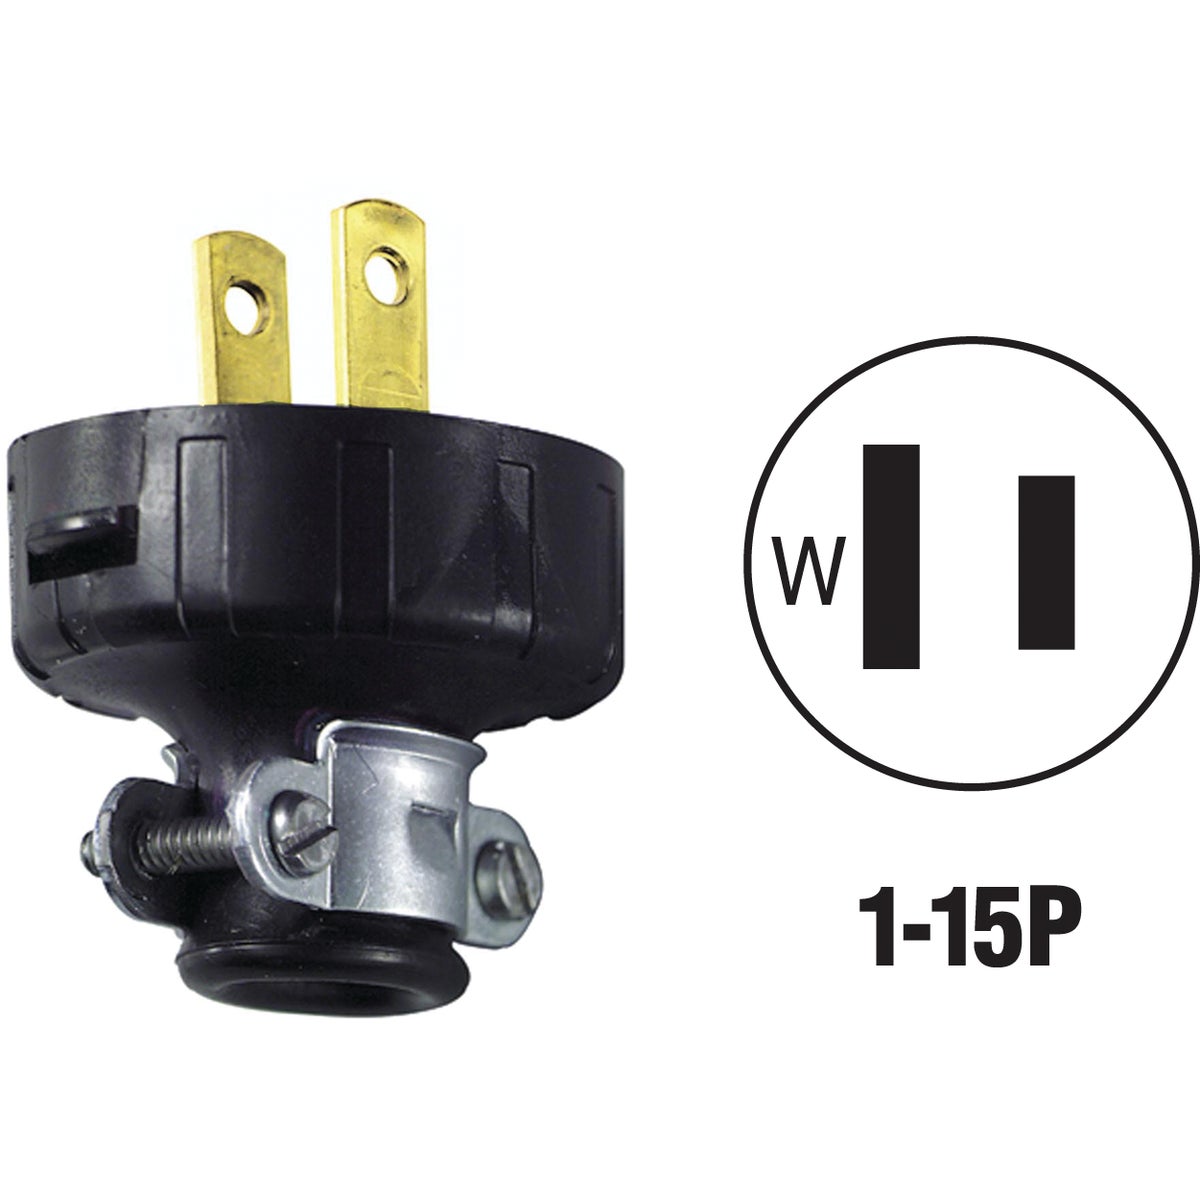 Item 503324, Round dead front plug. 2-pole, 2-wire, residential configuration.